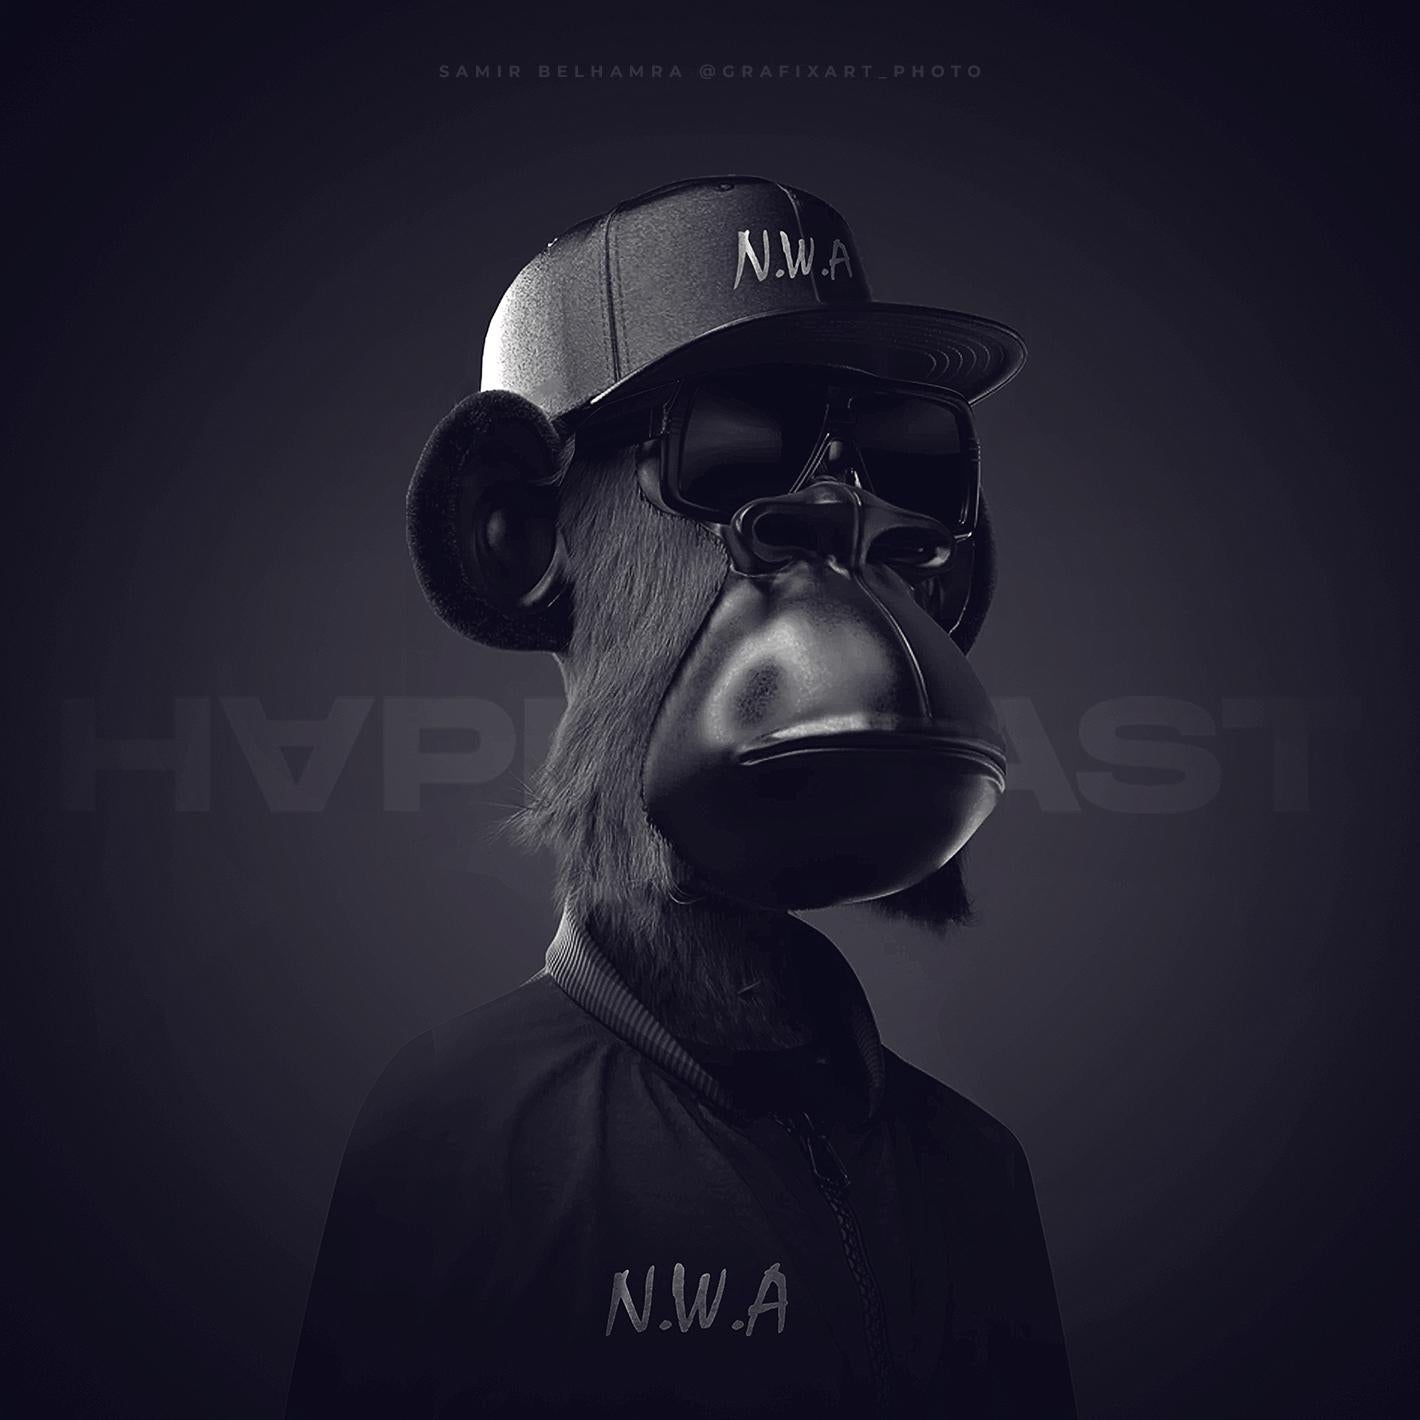 HAPEBEAST ! Literally one of the best NFT project of the year (my N.W.A version)